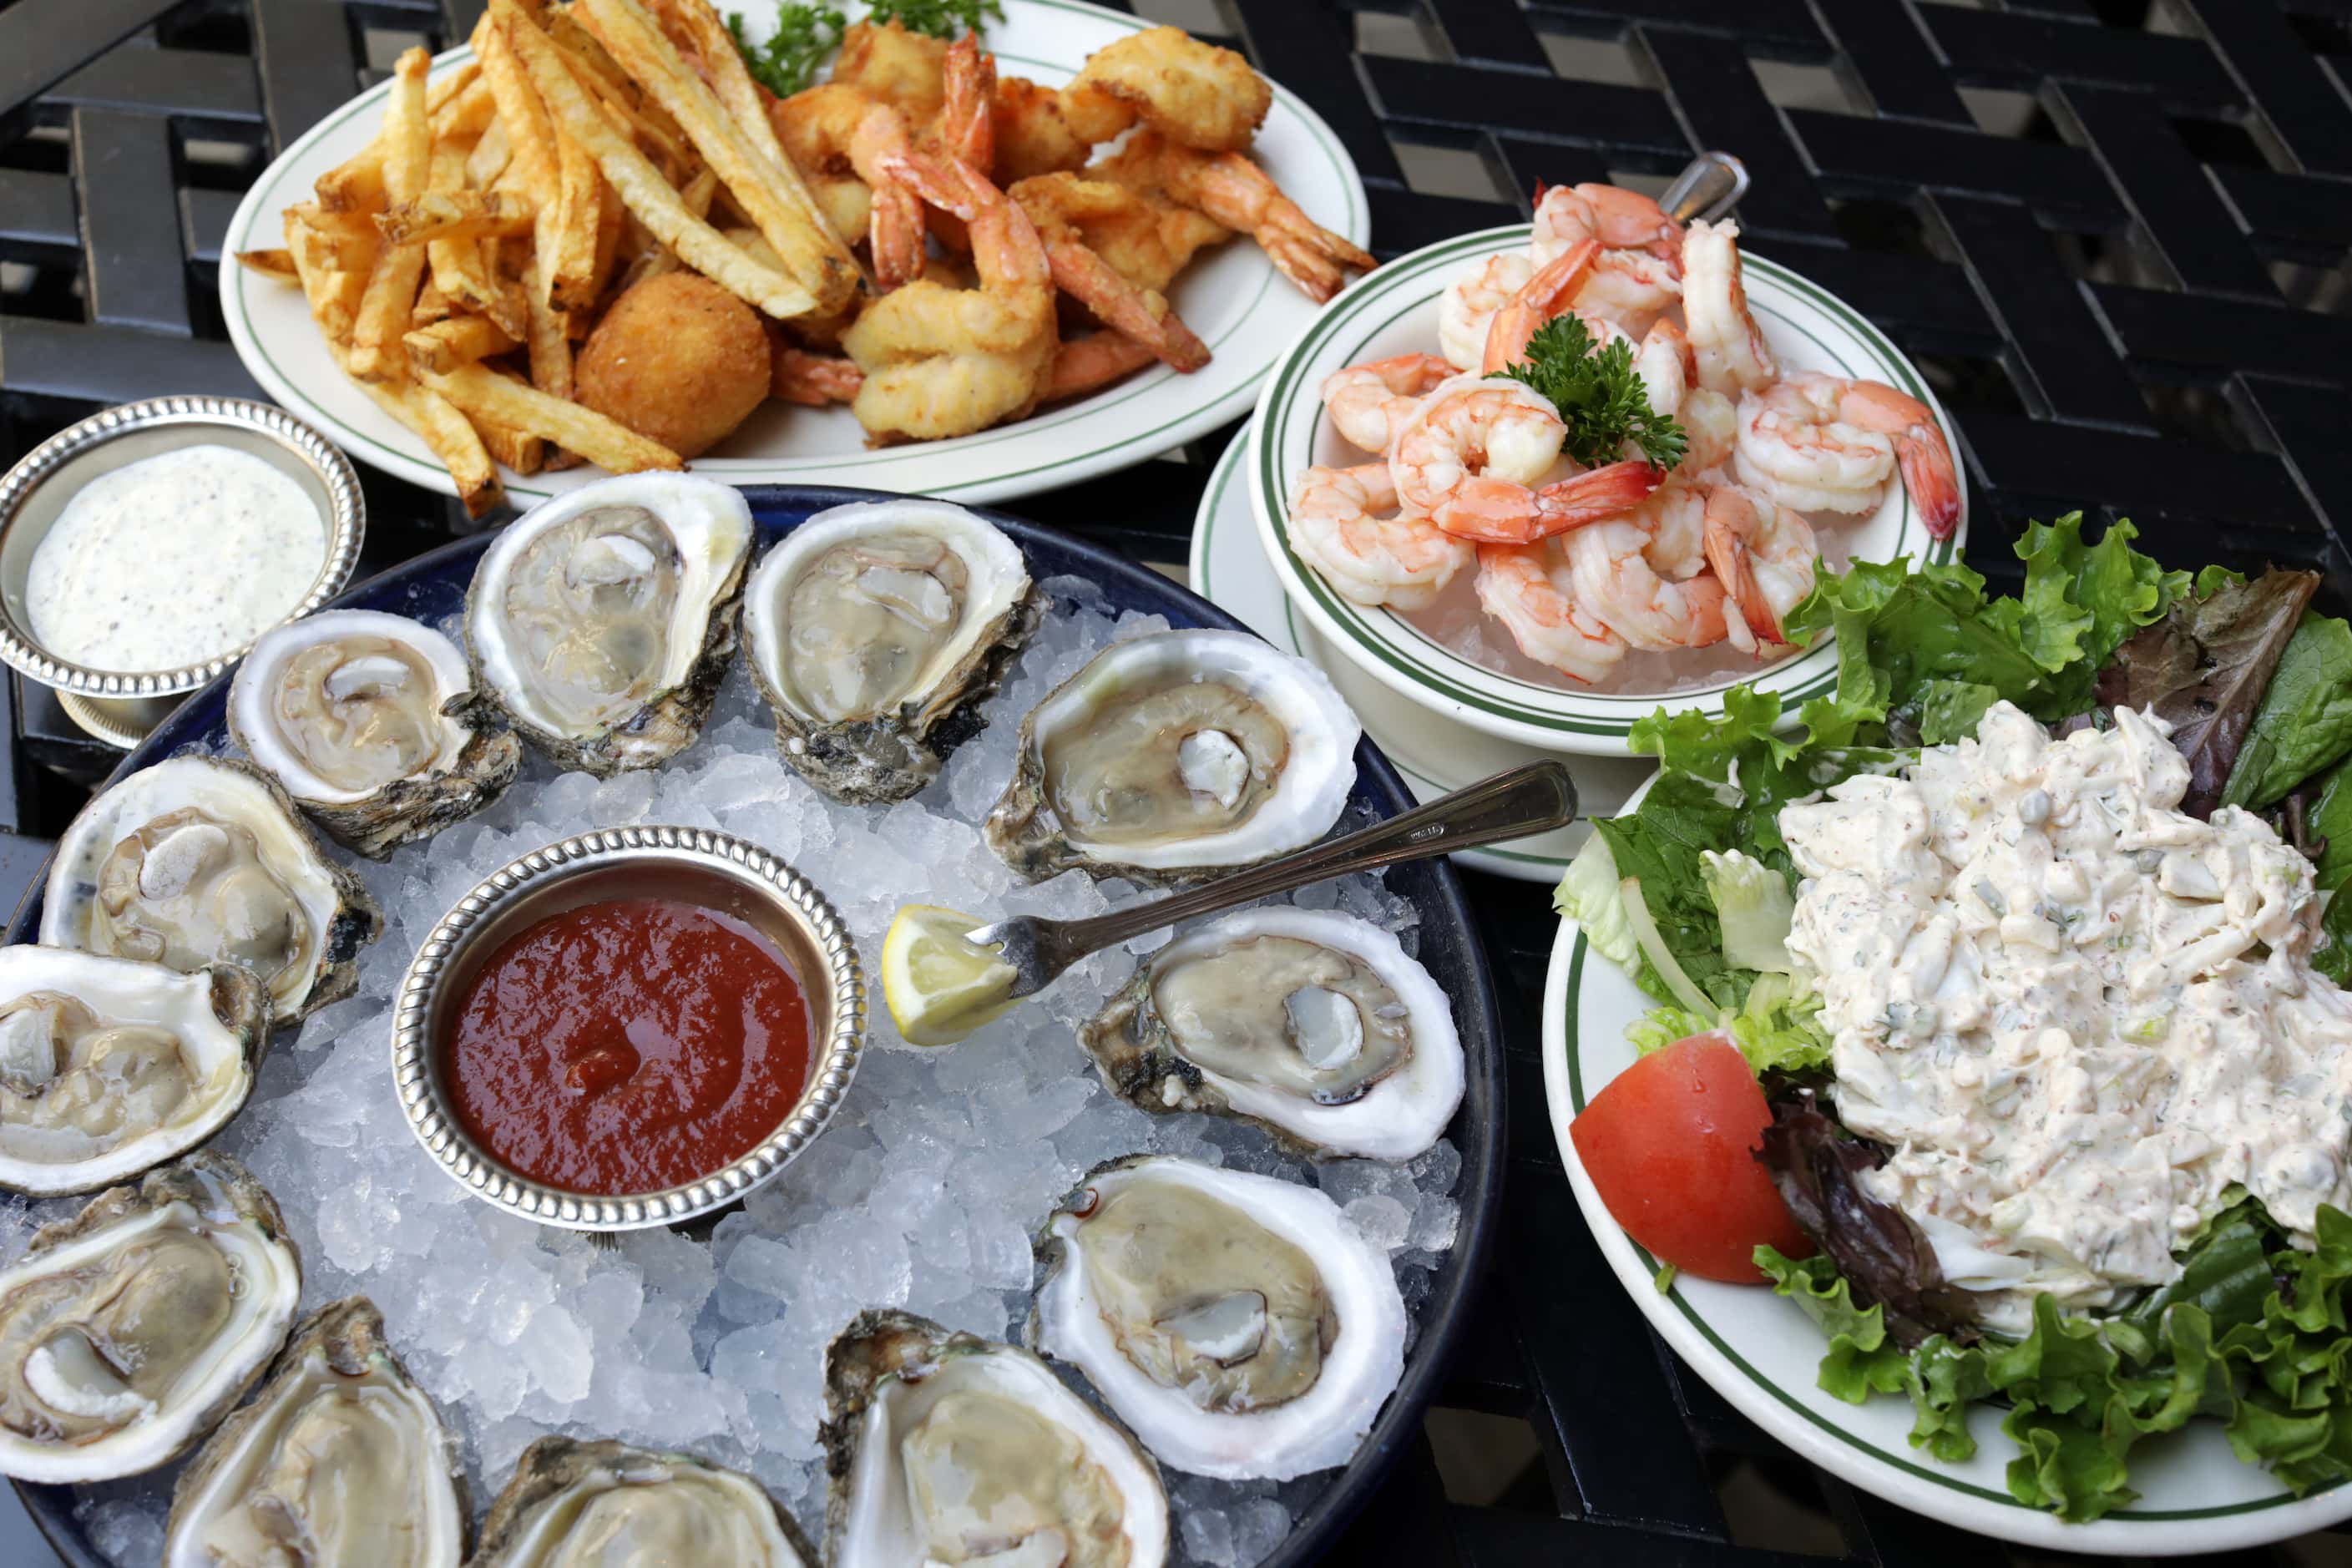 S&D Oyster Company in Dallas is famous for its oysters, shrimp, french fries and crab meat...